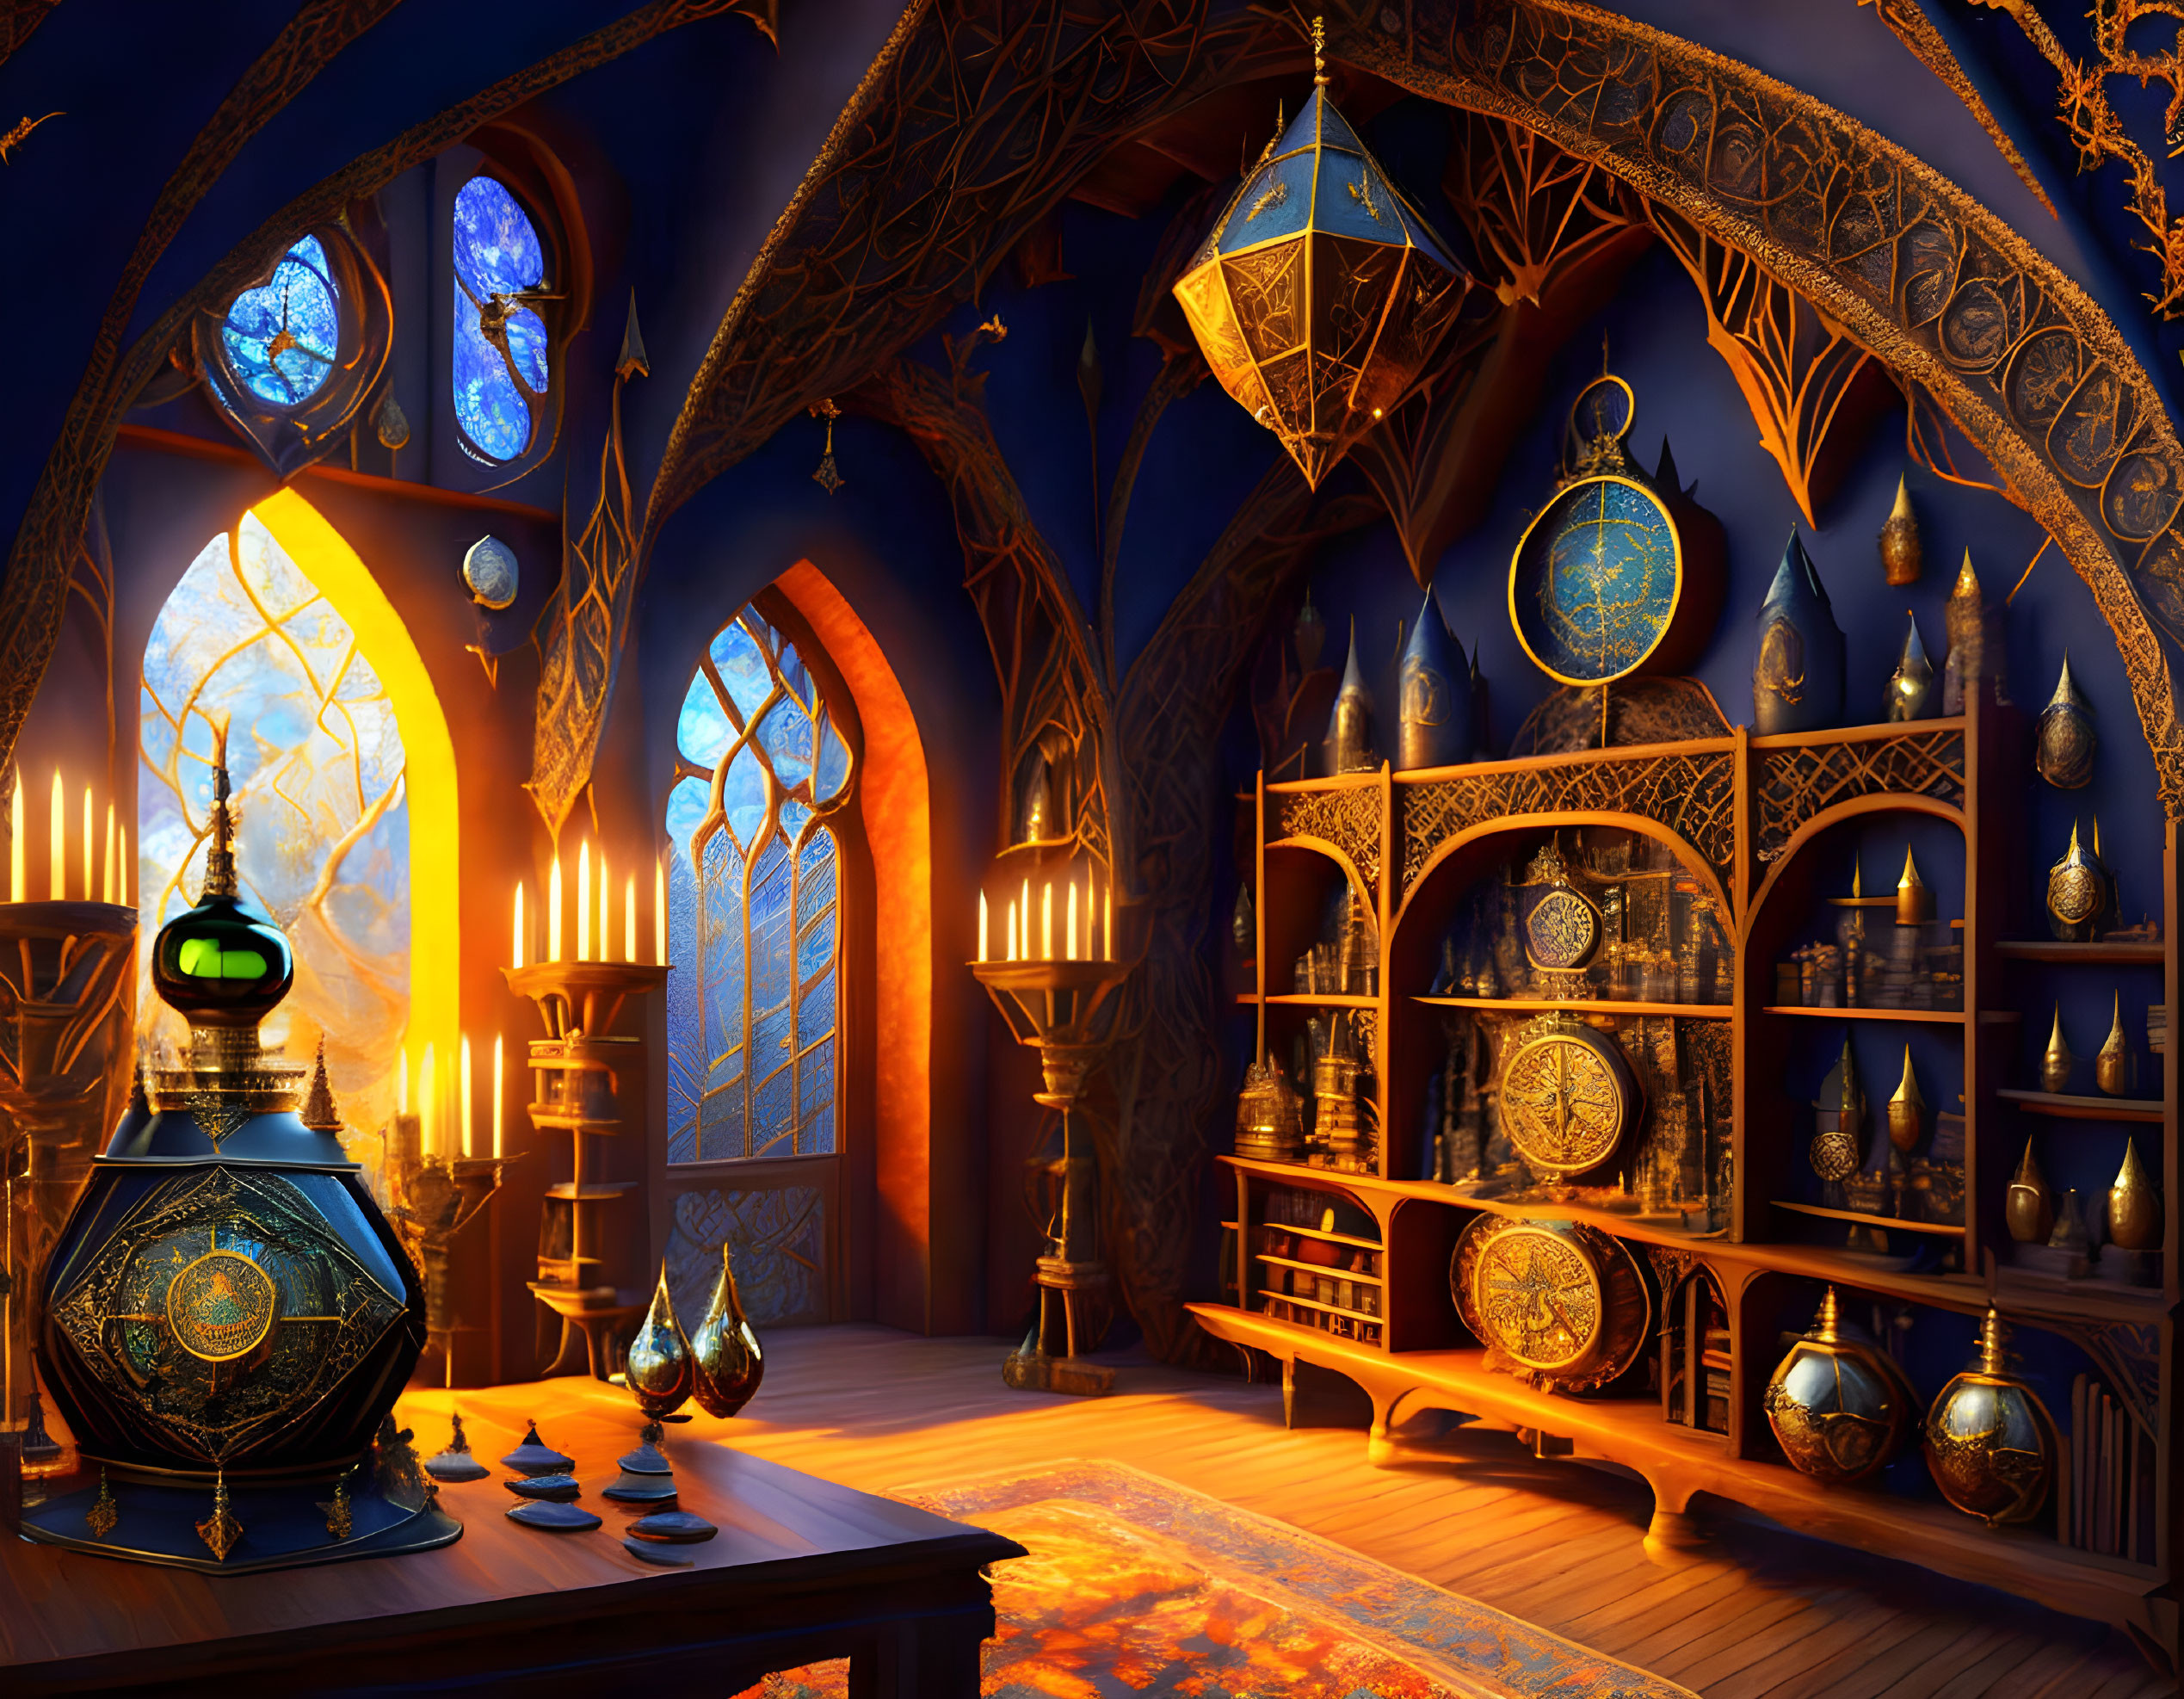 Fantasy-style interior with ornate windows, pottery shelves, and intricate lamp